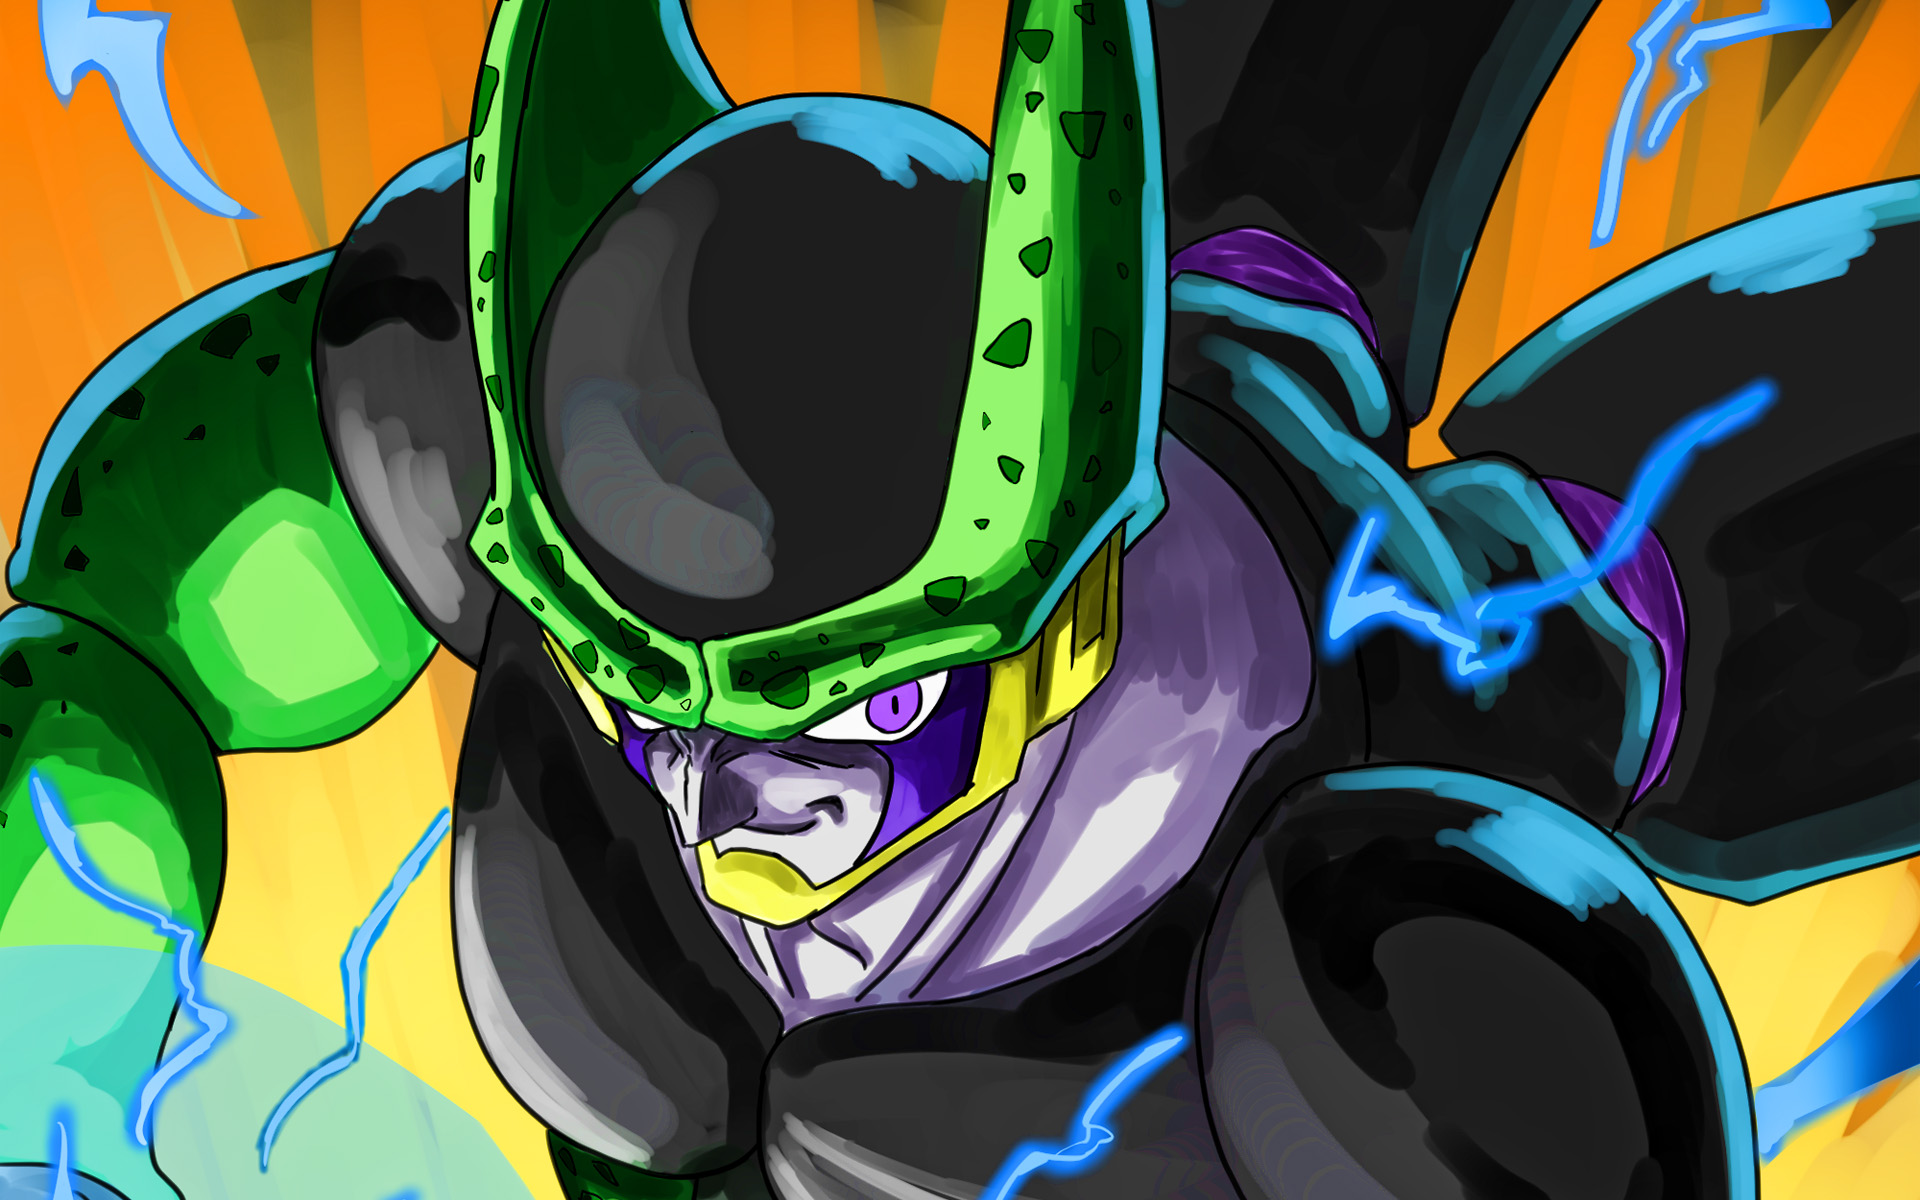 Download Wallpapers Cell Dragon Ball Abstract Art Dbs Dragon Ball Cell Dragon Ball Super 0935